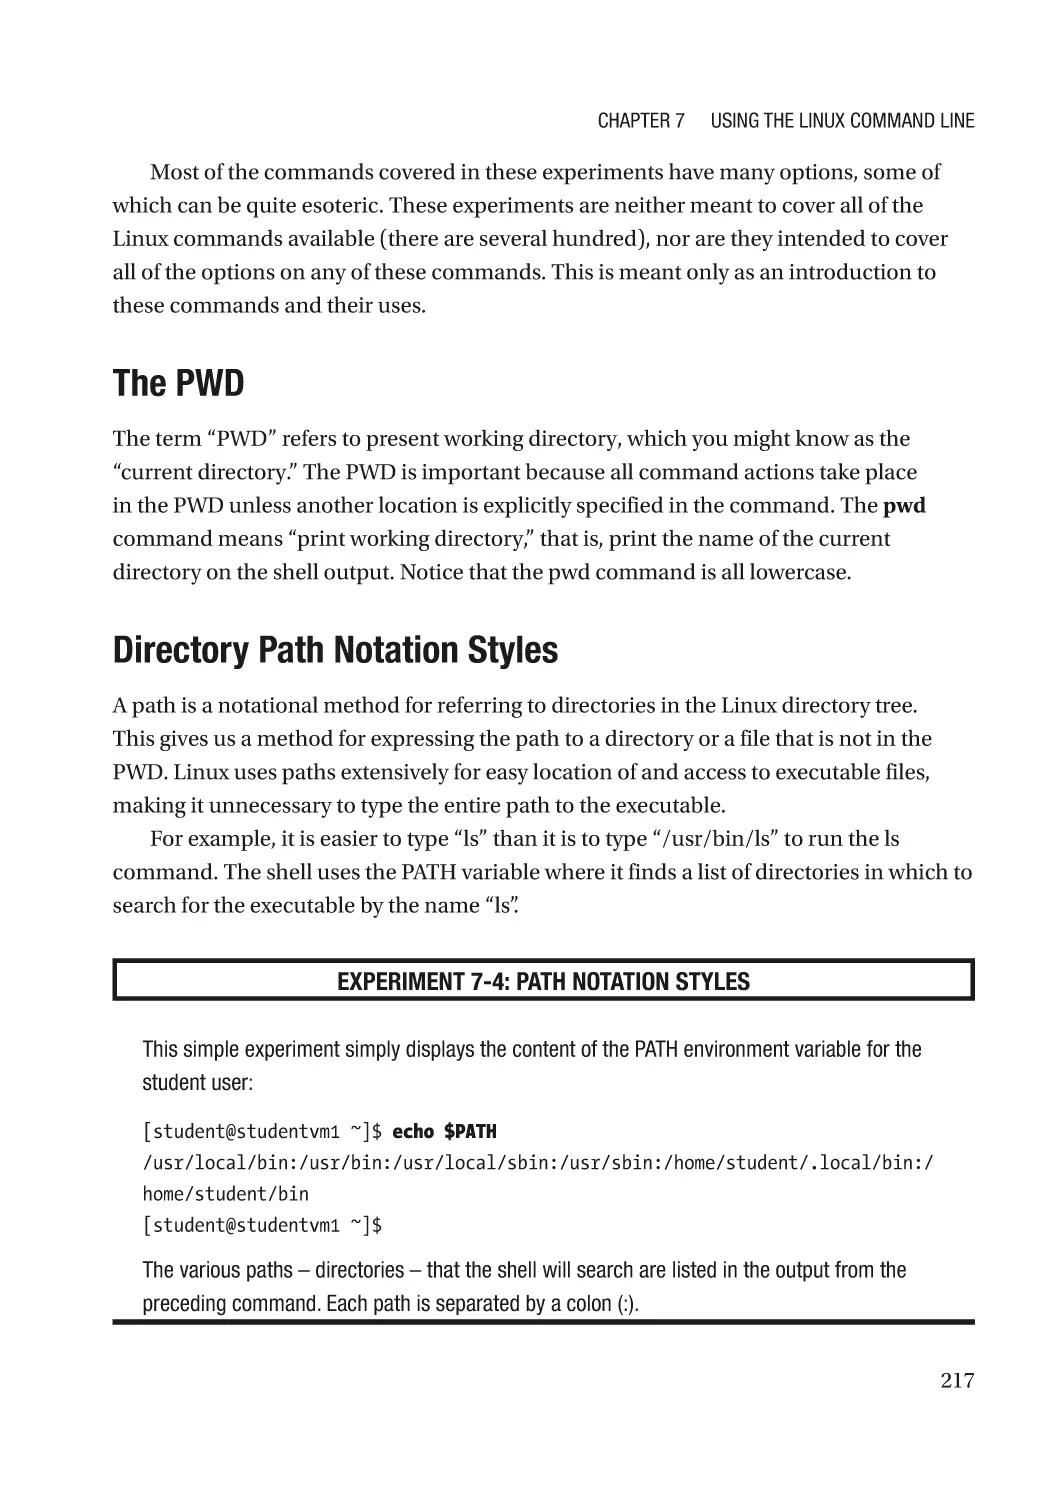 The PWD
Directory Path Notation Styles